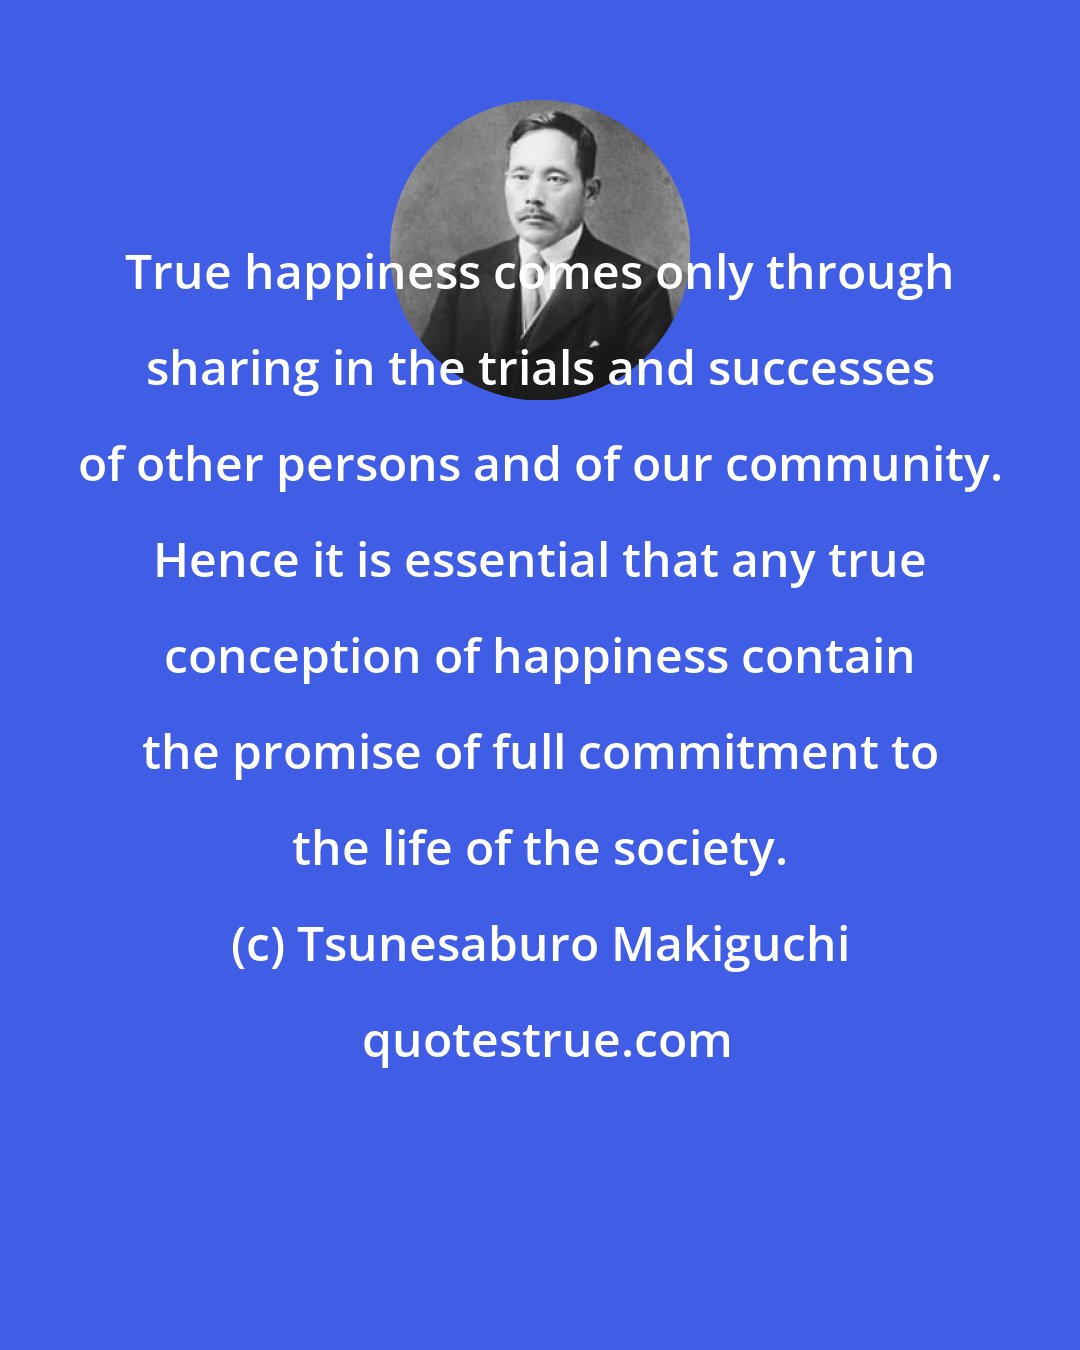 Tsunesaburo Makiguchi: True happiness comes only through sharing in the trials and successes of other persons and of our community. Hence it is essential that any true conception of happiness contain the promise of full commitment to the life of the society.